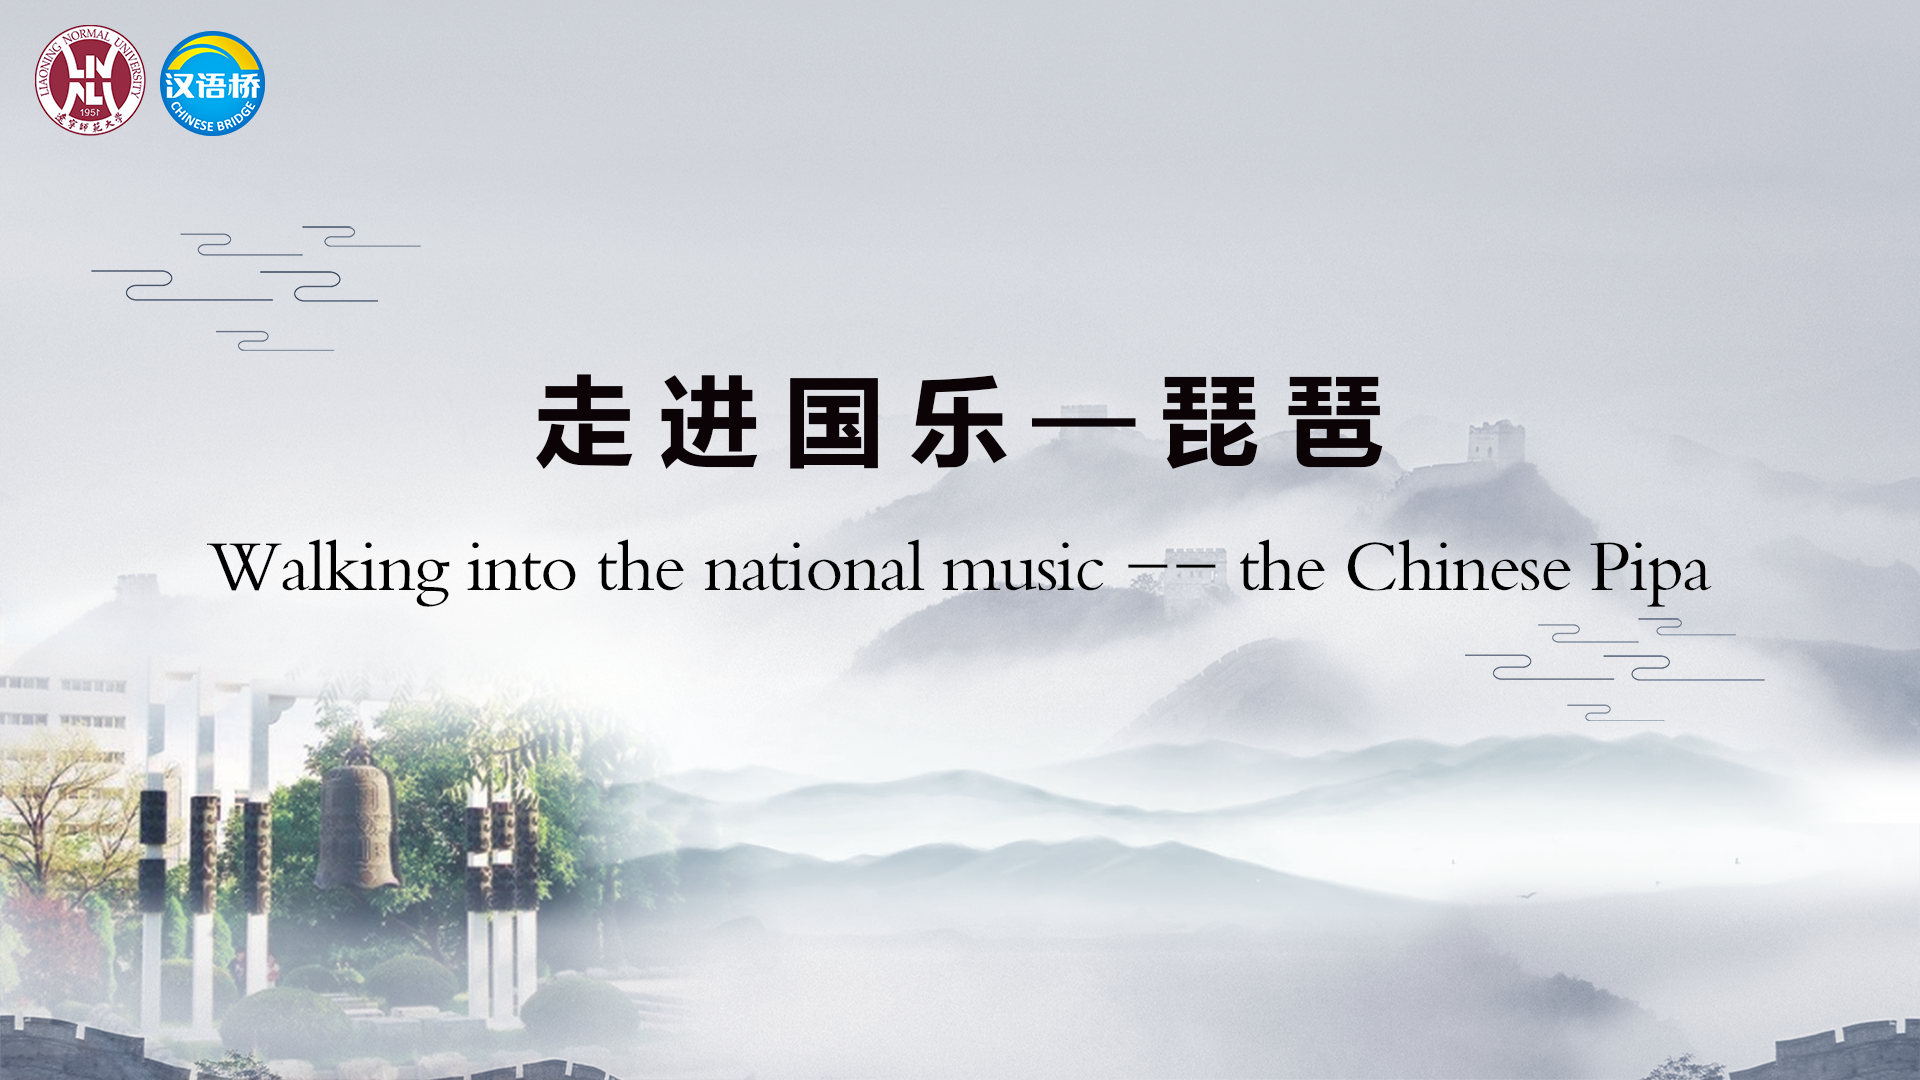 Into the Chinese National Musical Instrument -- Pipa(Chinese Lute)